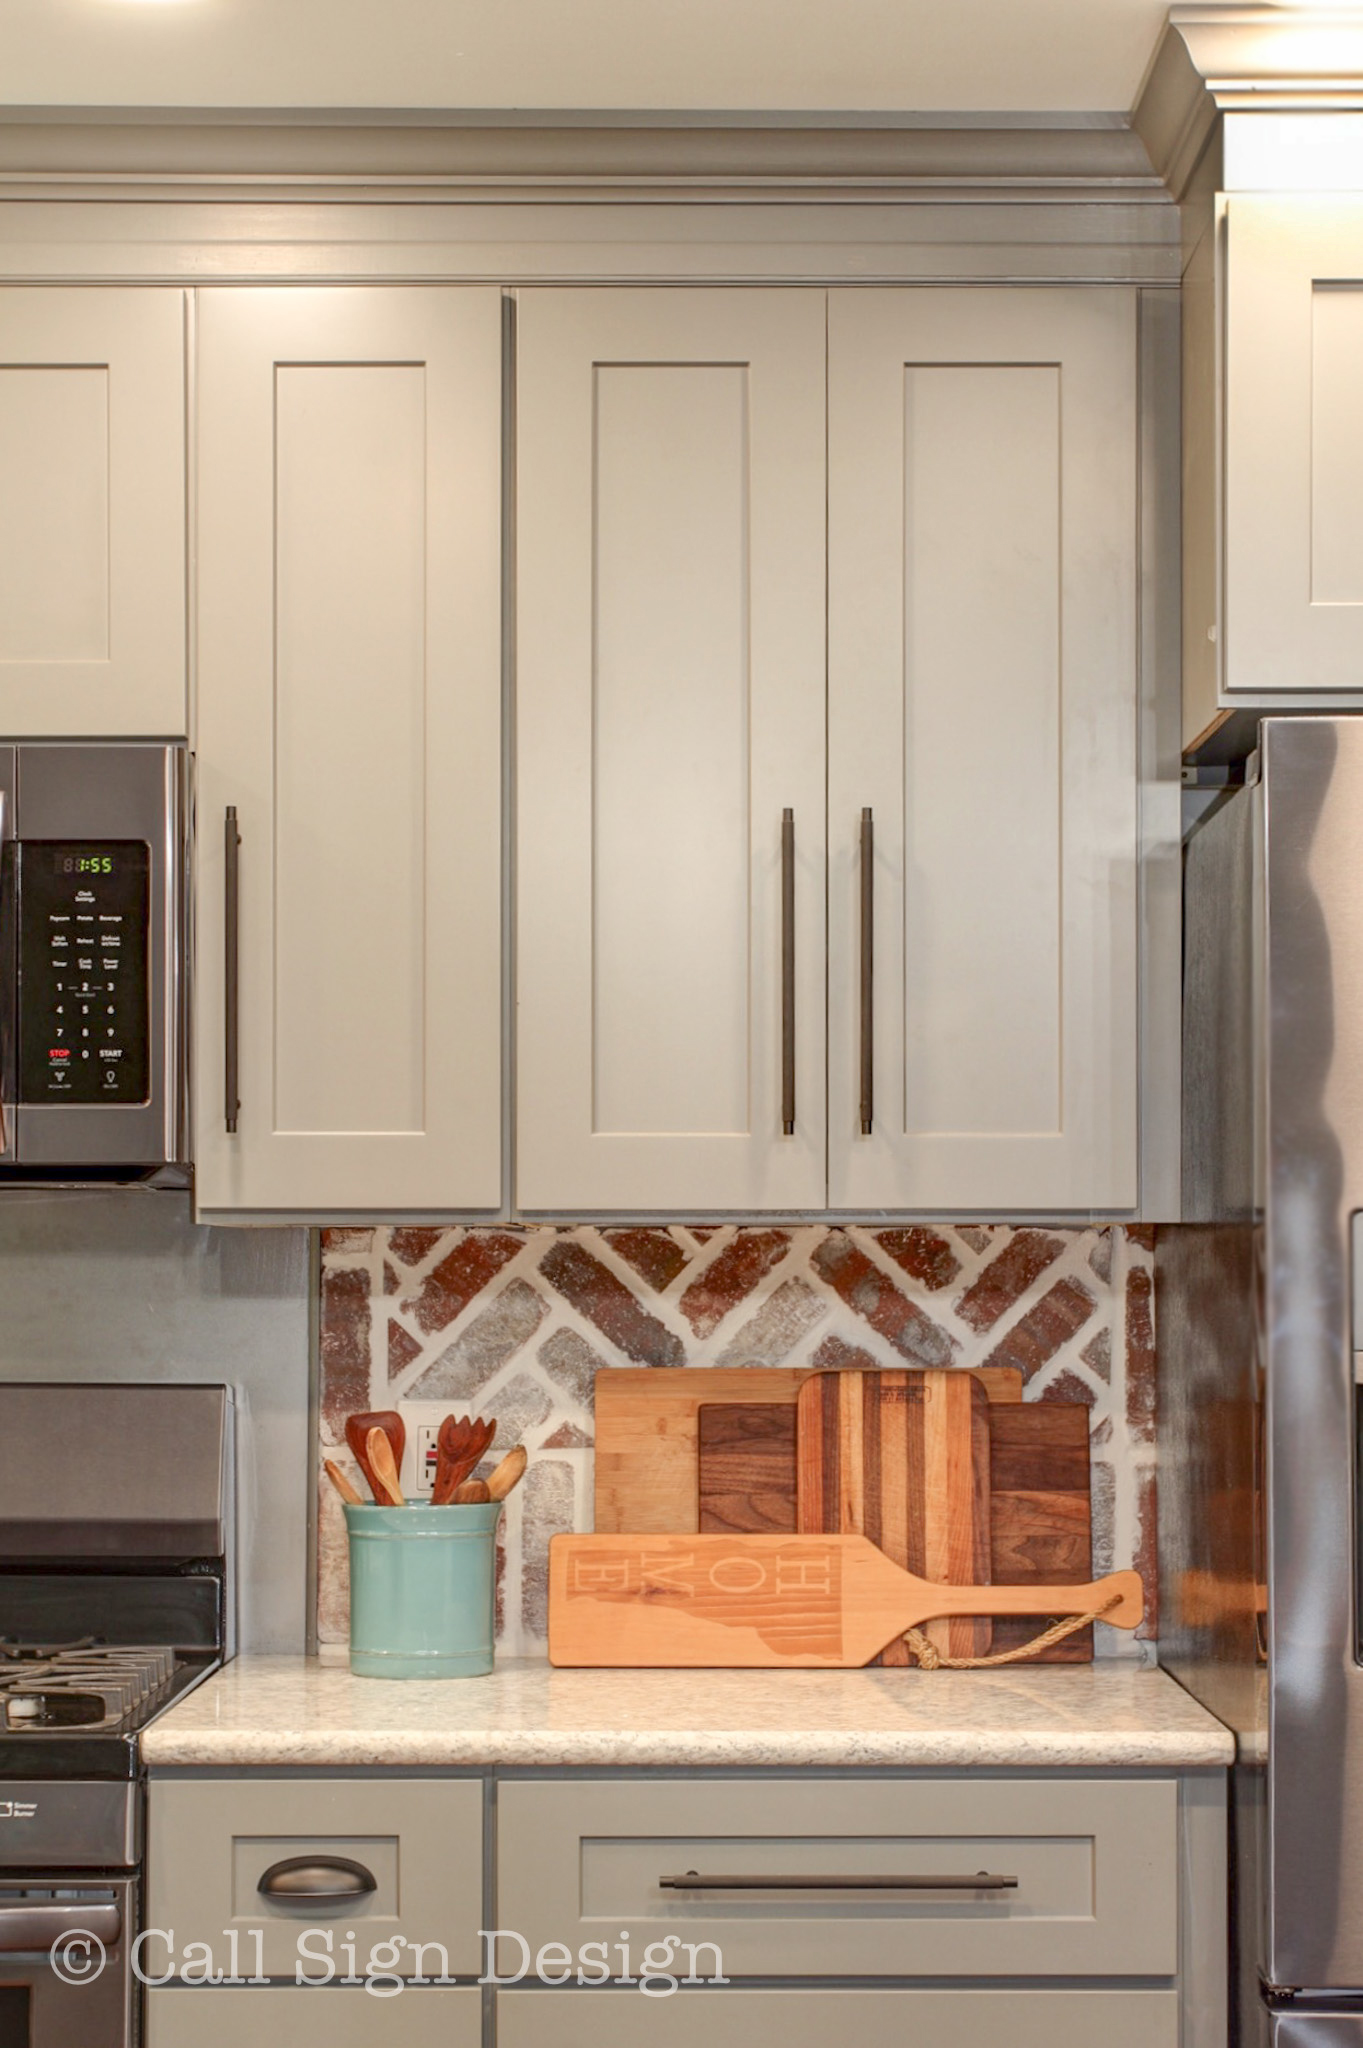 Before and After Pictures of Grandma's New Vermont Cottage Kitchen: Sponsored by Lily Ann Cabinets and designed by @callsigndesign on Instagram and @slavetodiy on Pinterest.